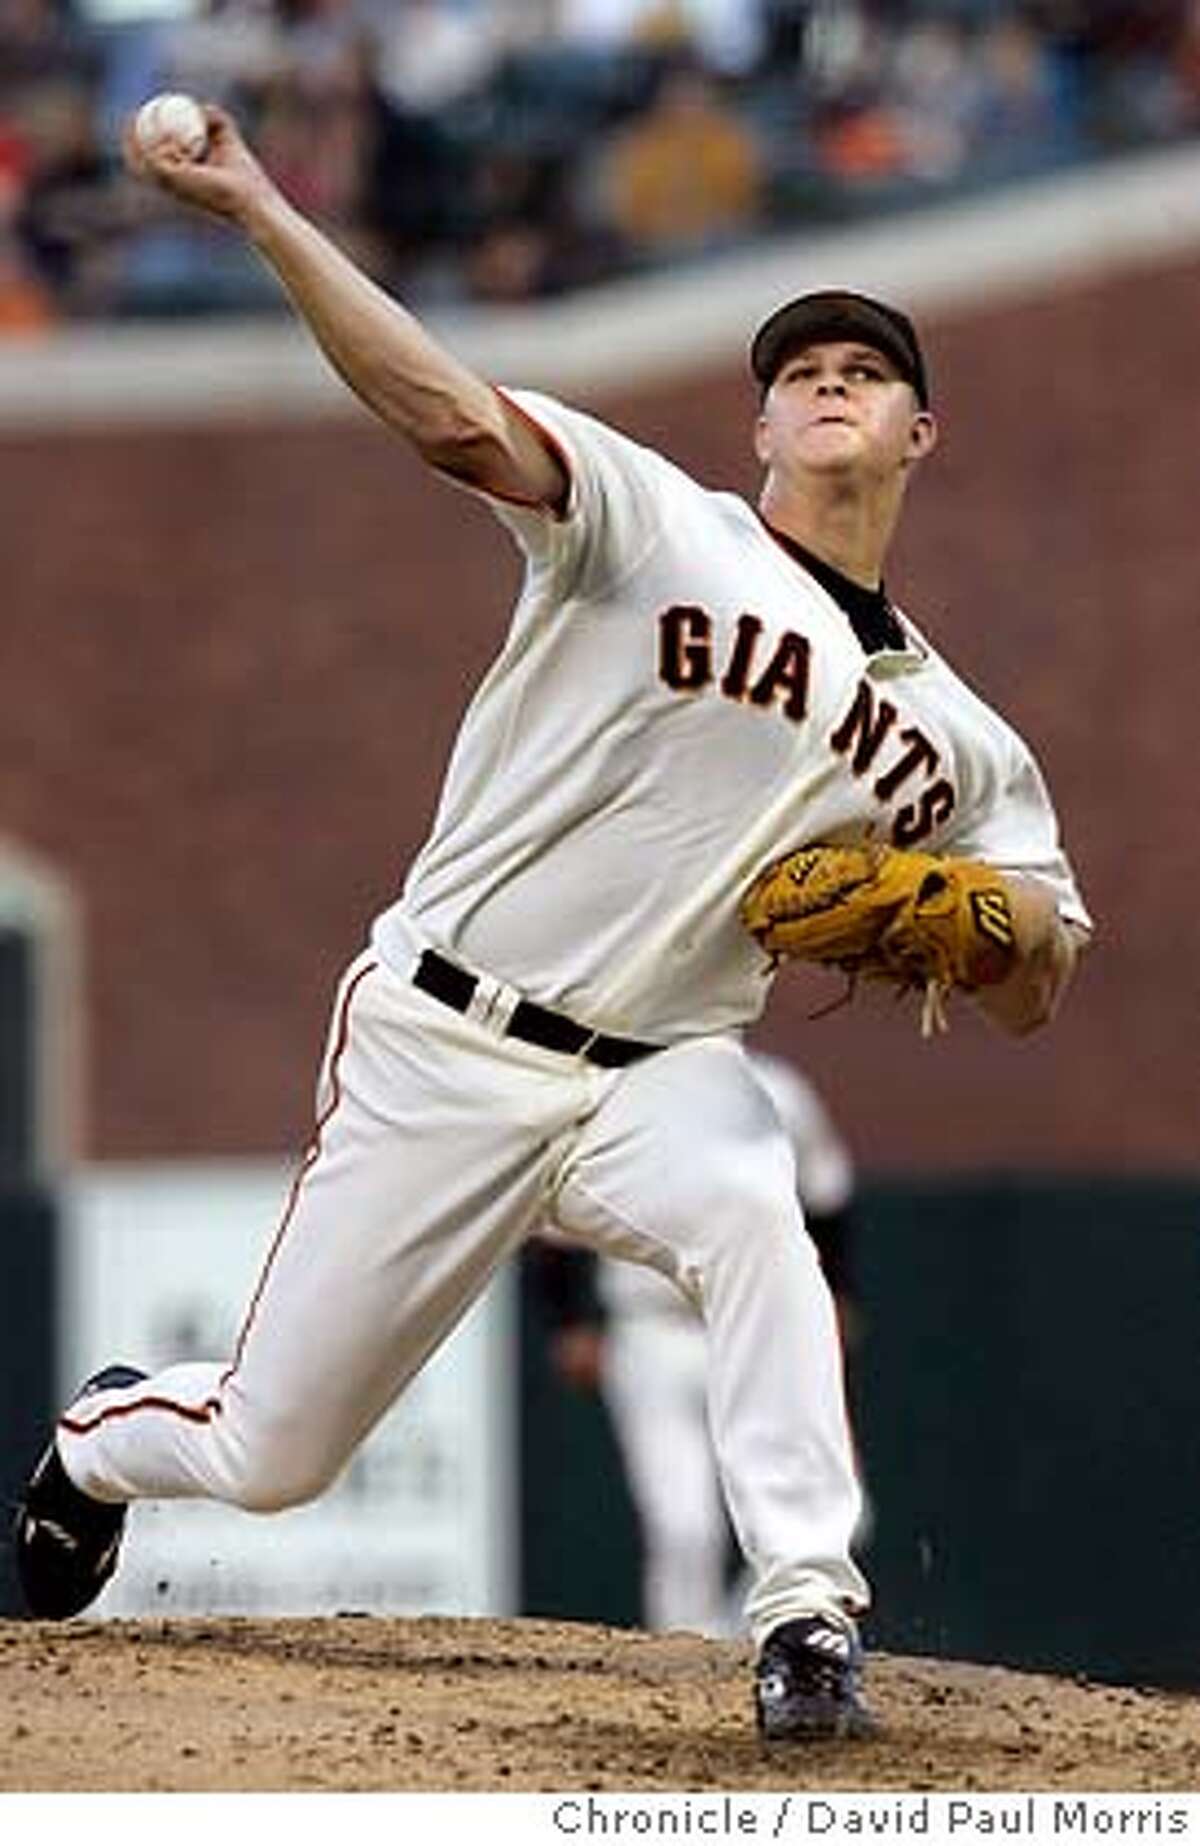 SAN FRANCISCO - JUNE 19: San Francisco Giants starting pitcher Matt Cain pitches as the San Francisco Giants plays the Los Angeles Angels in ATT Park on June 19, 2006 in San Francisco, California. (Photo by David Paul Morris/The Chronicle)